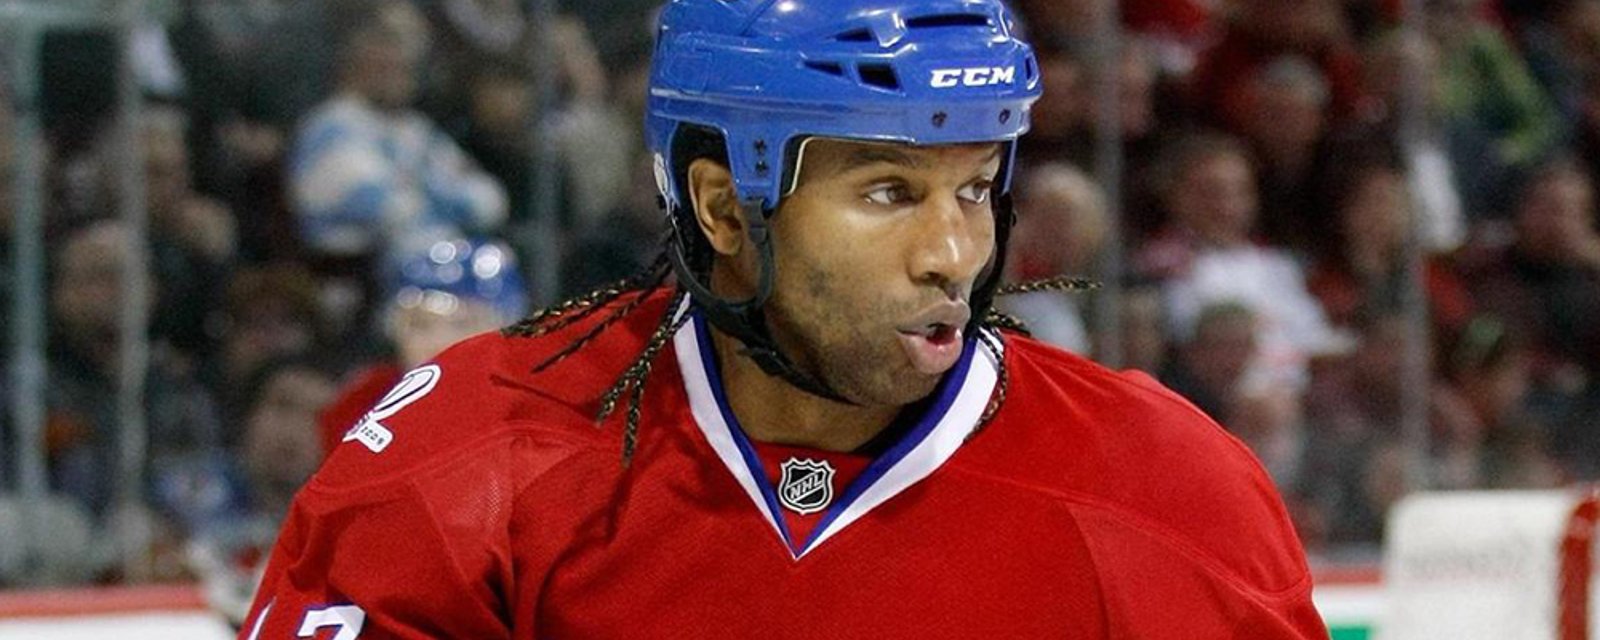 Georges Laraque says Jesperi Kotkaniemi's Hurricanes offer sheet is a blessing